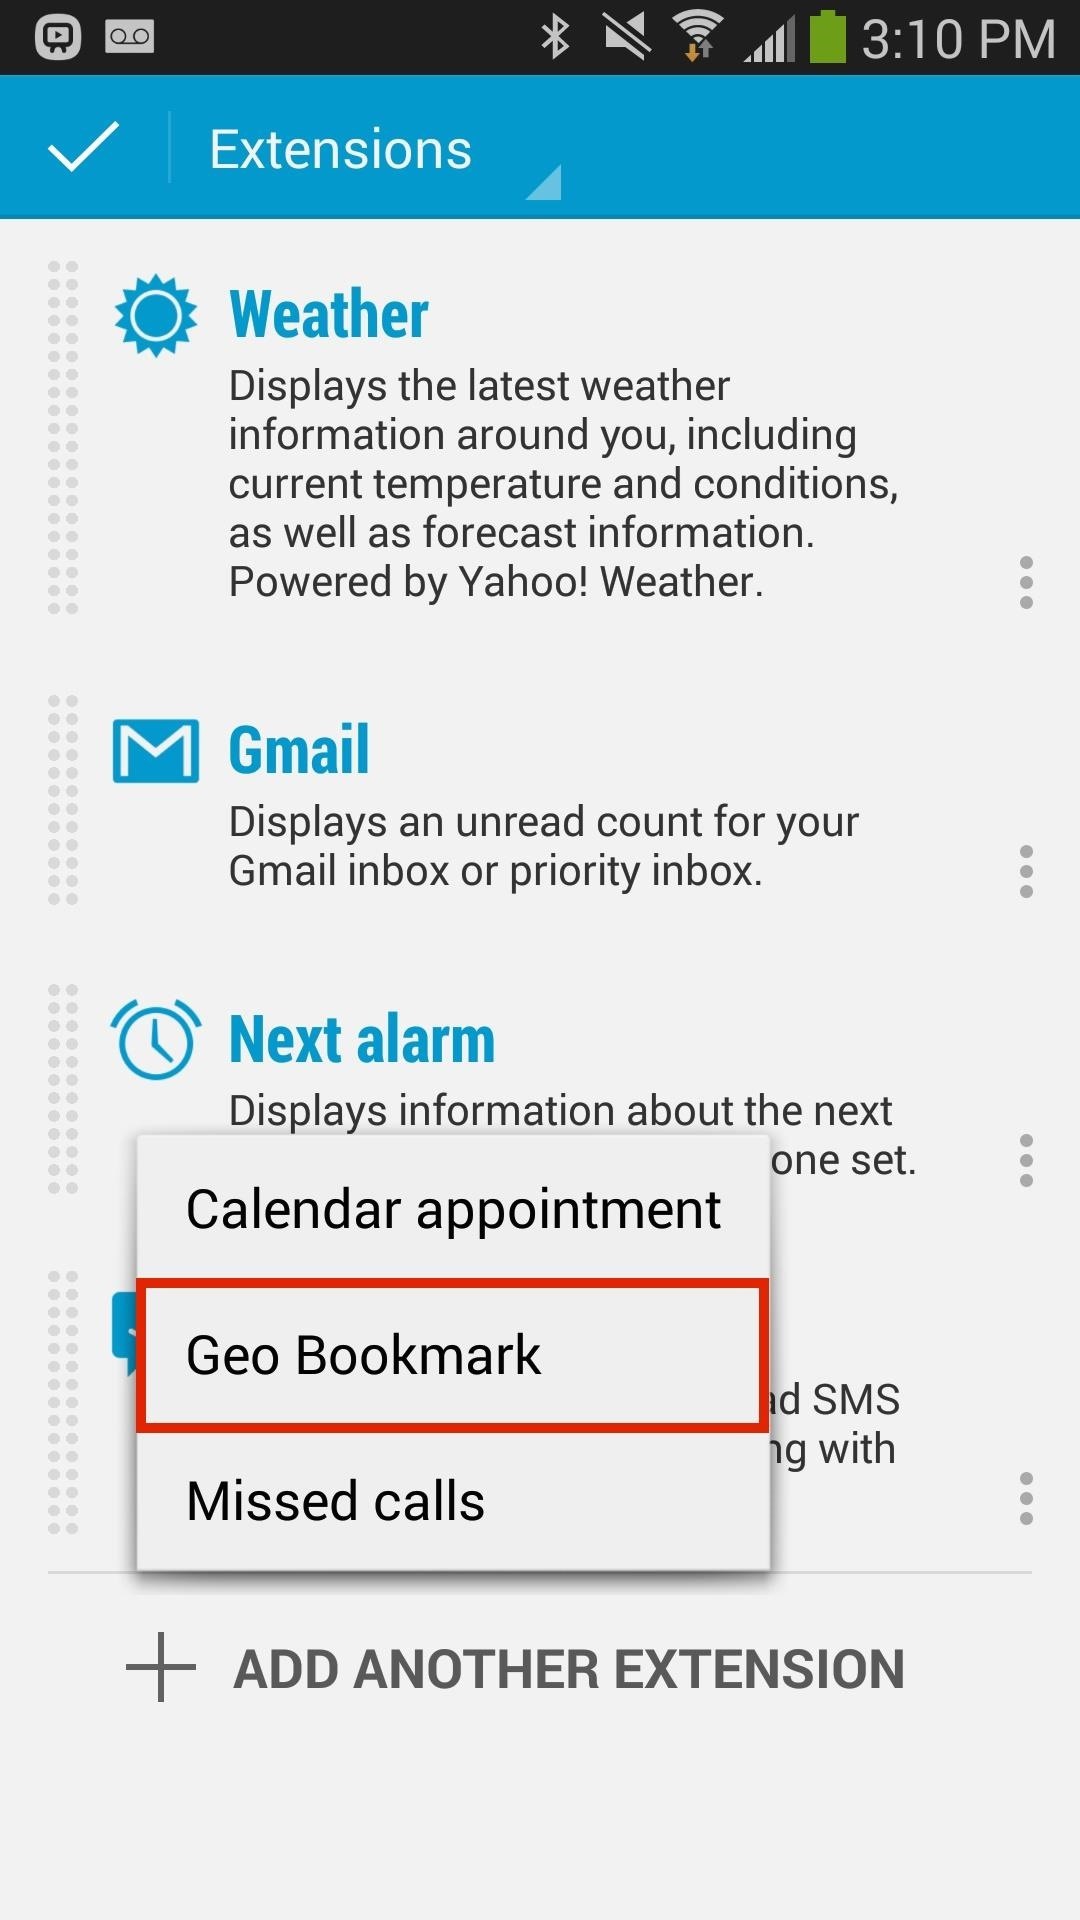 How to Create & Access Location Bookmarks on Your Galaxy Note 3 with a Single Tap